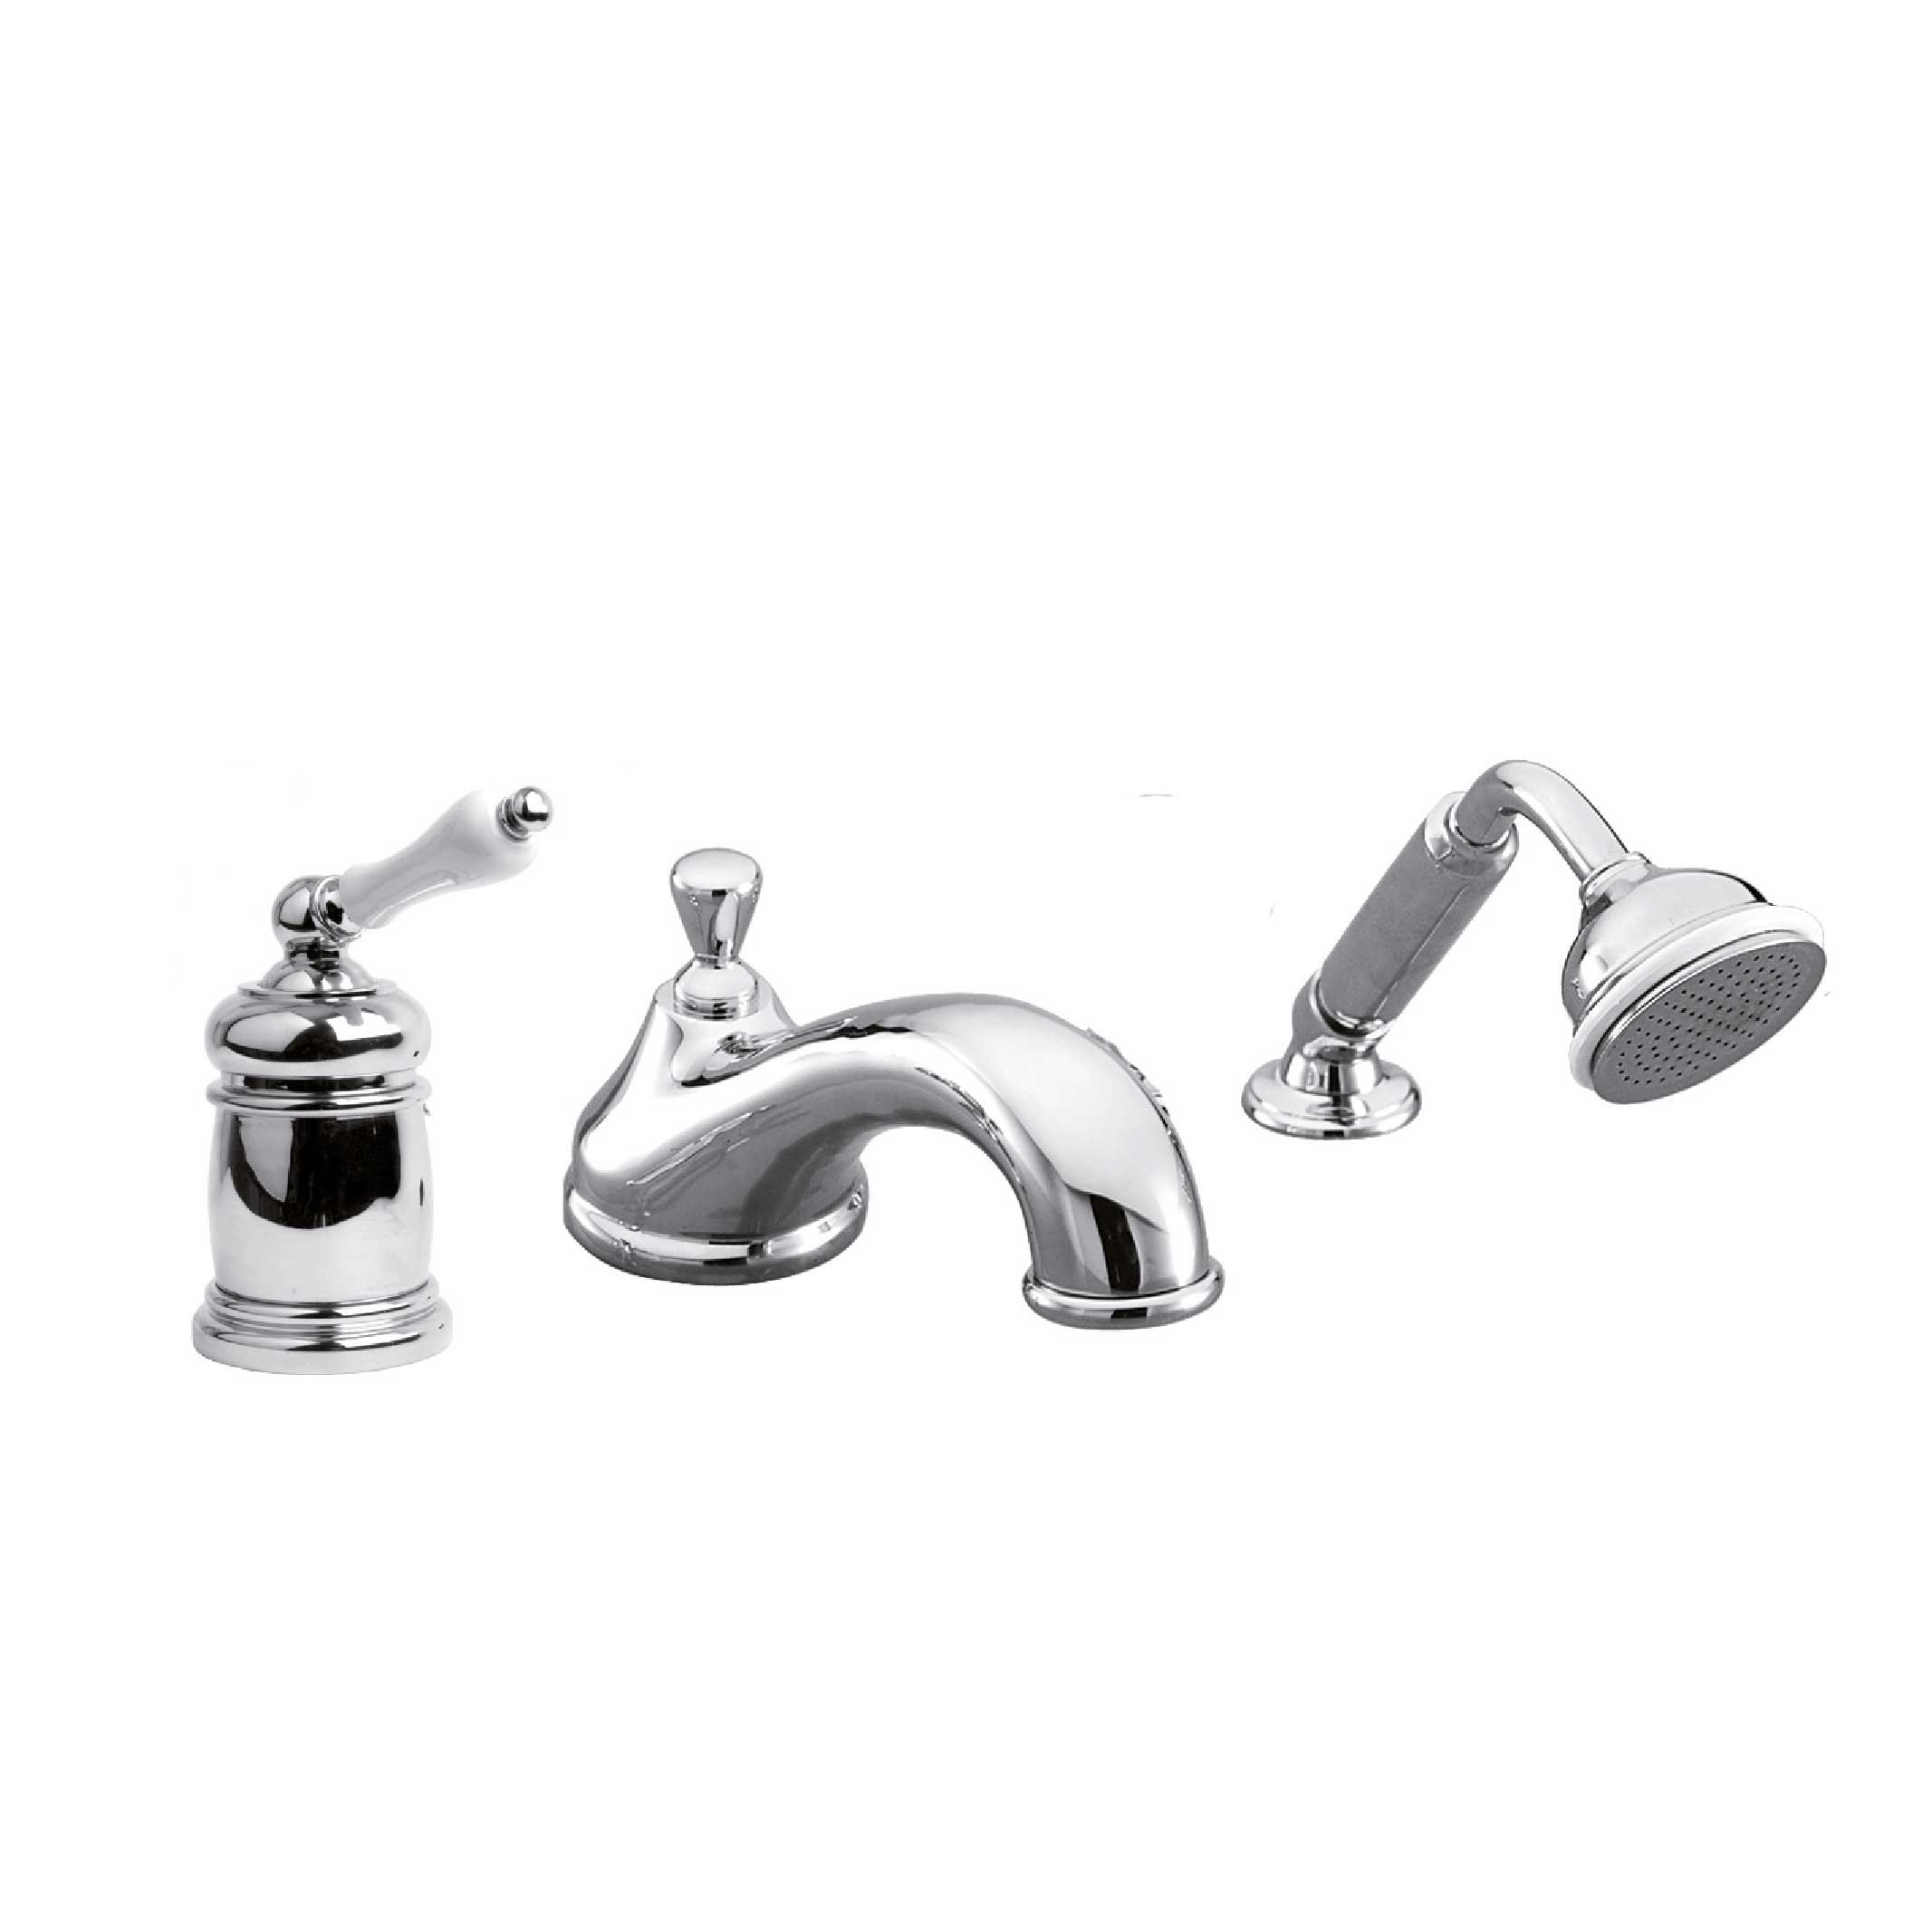 M40-3301M 3-hole single-lever bath and shower mixer